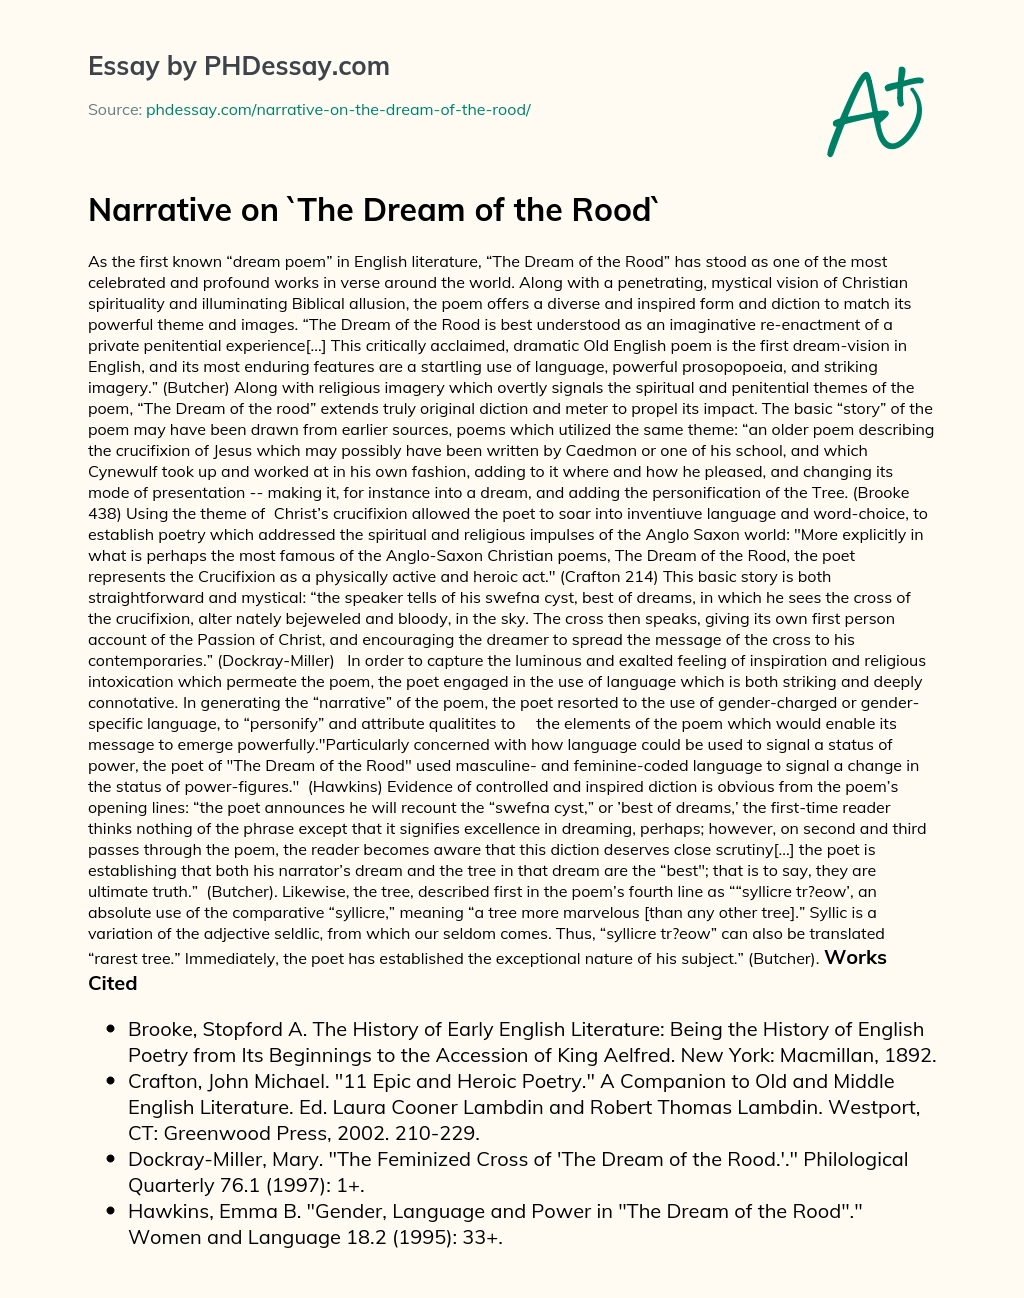 Narrative on `The Dream of the Rood` essay